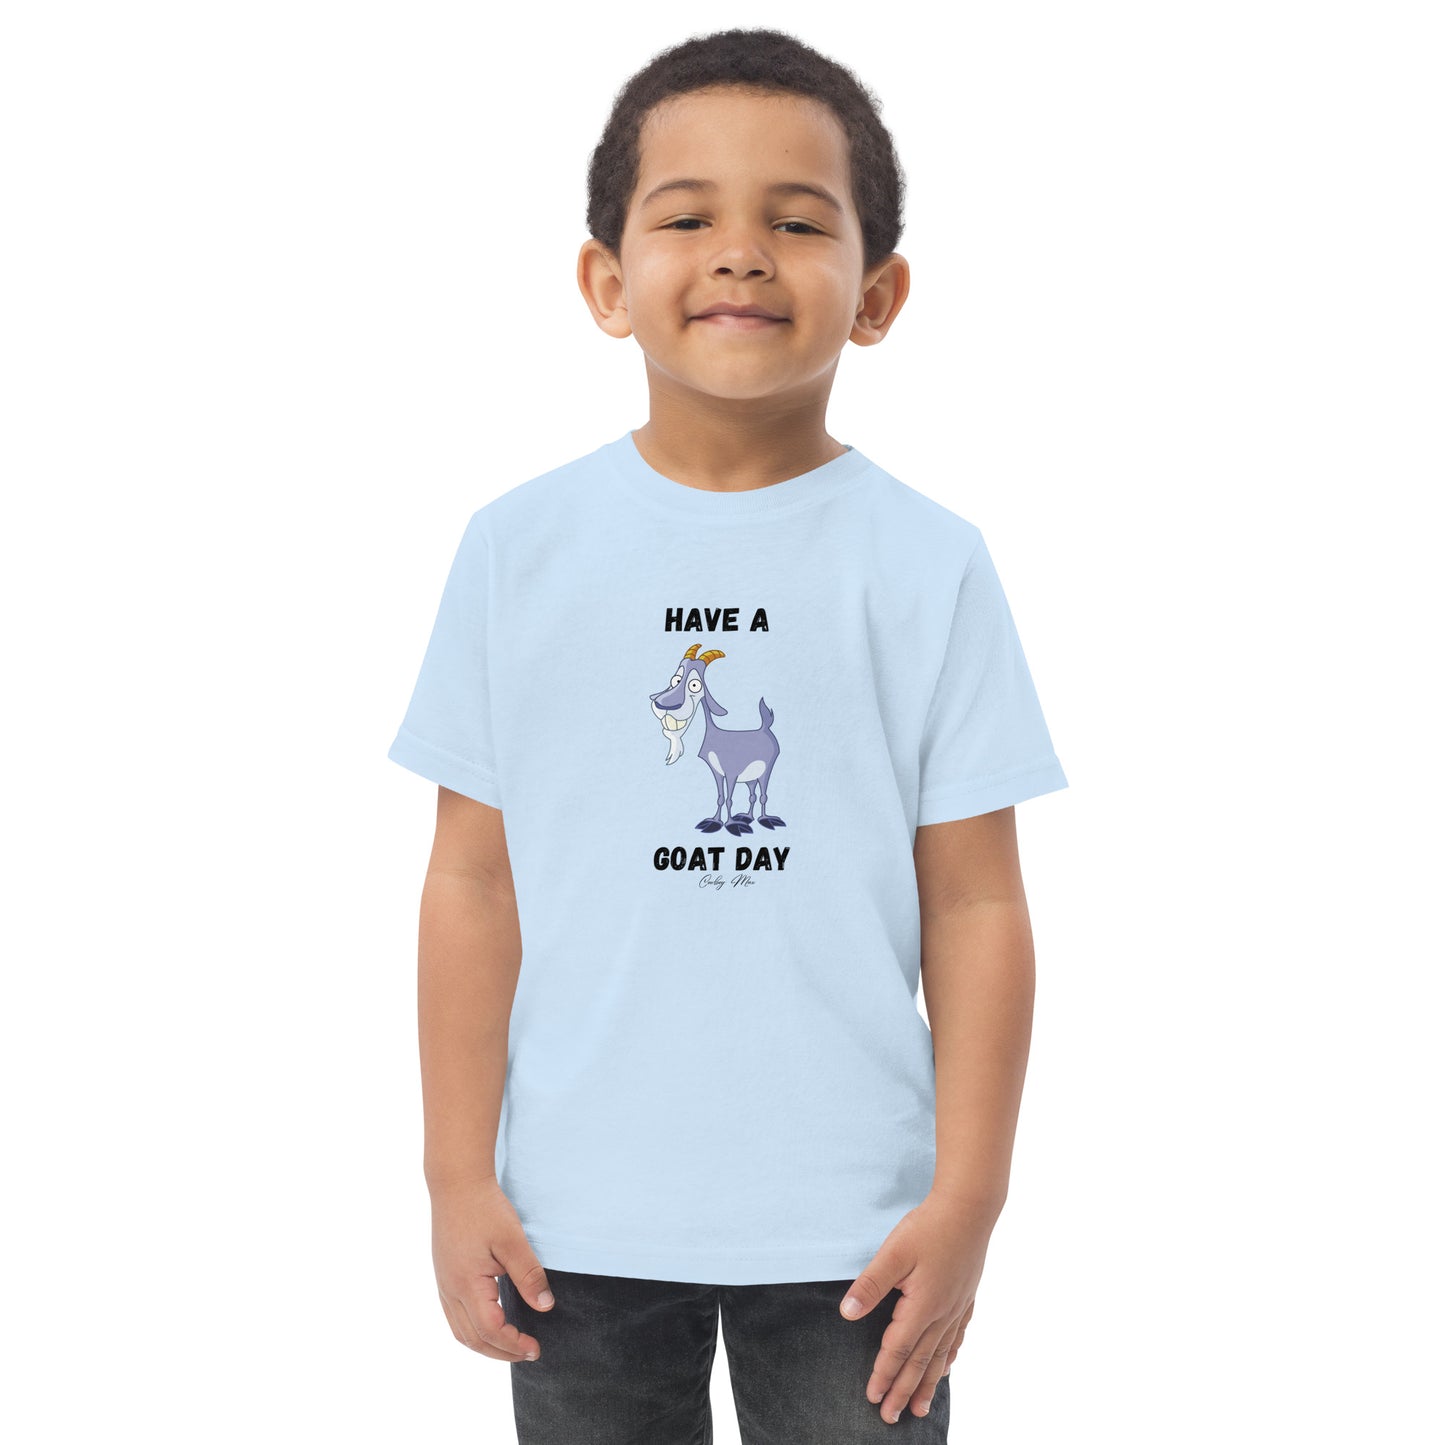 Have A GOAT Day - Bearded Goat: Toddler jersey t-shirt